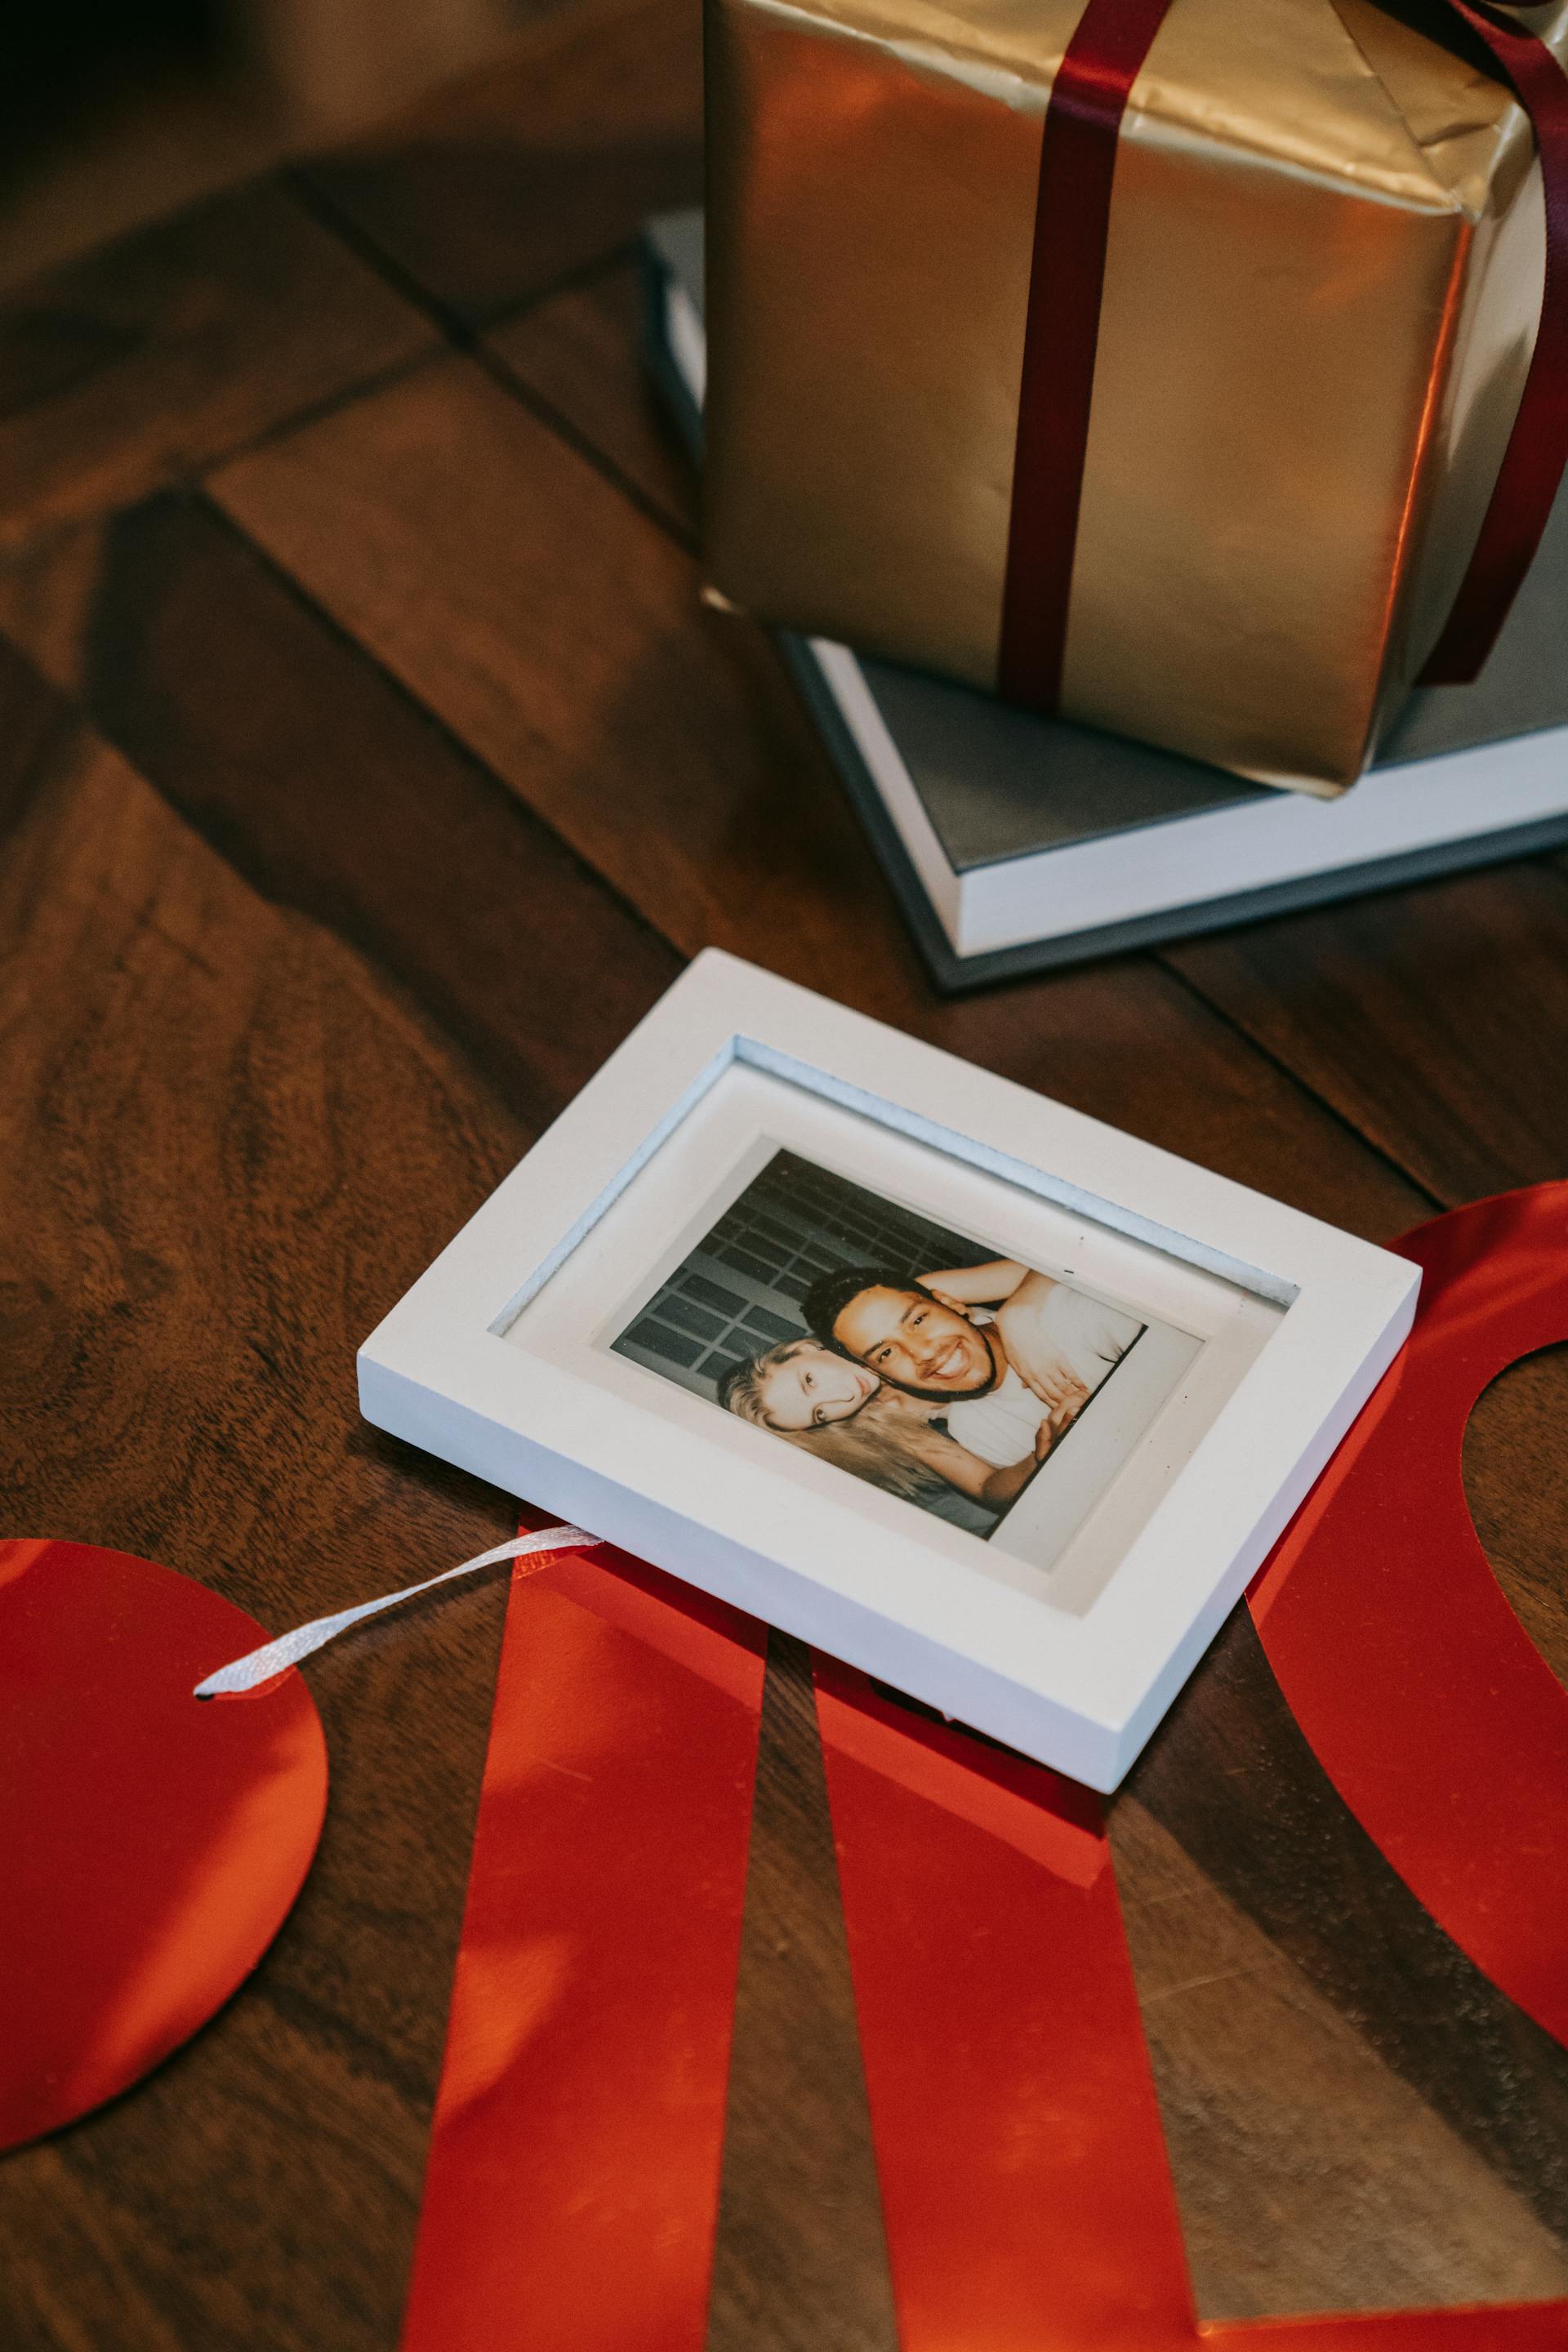 A wooden frame with a couple's photograph | Source: Pexels